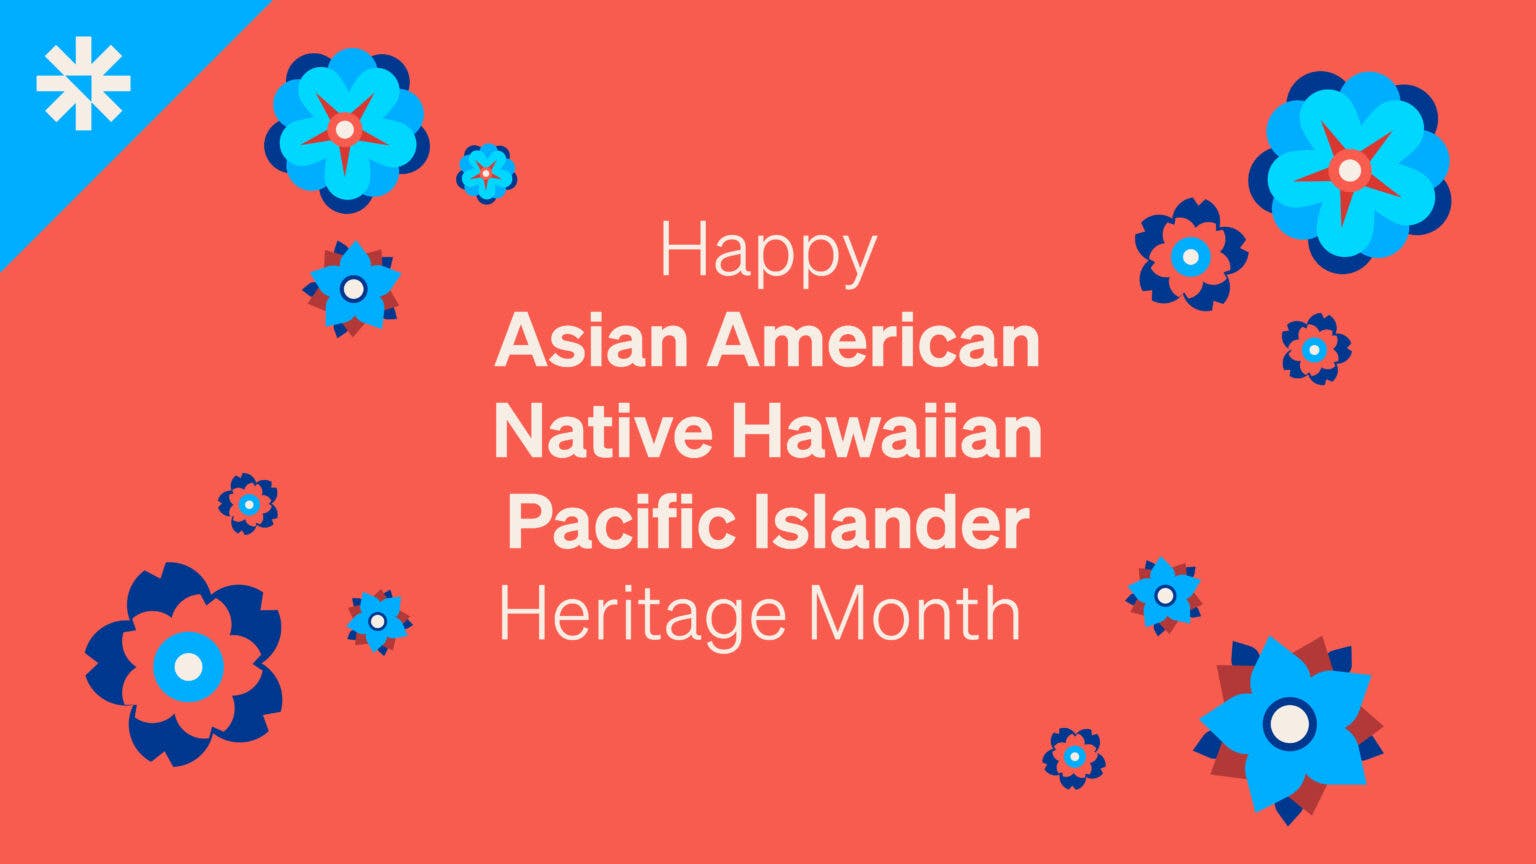 Curative Celebrates AANHPI Heritage Month by Showcasing our AANHPI Healthcare Leaders